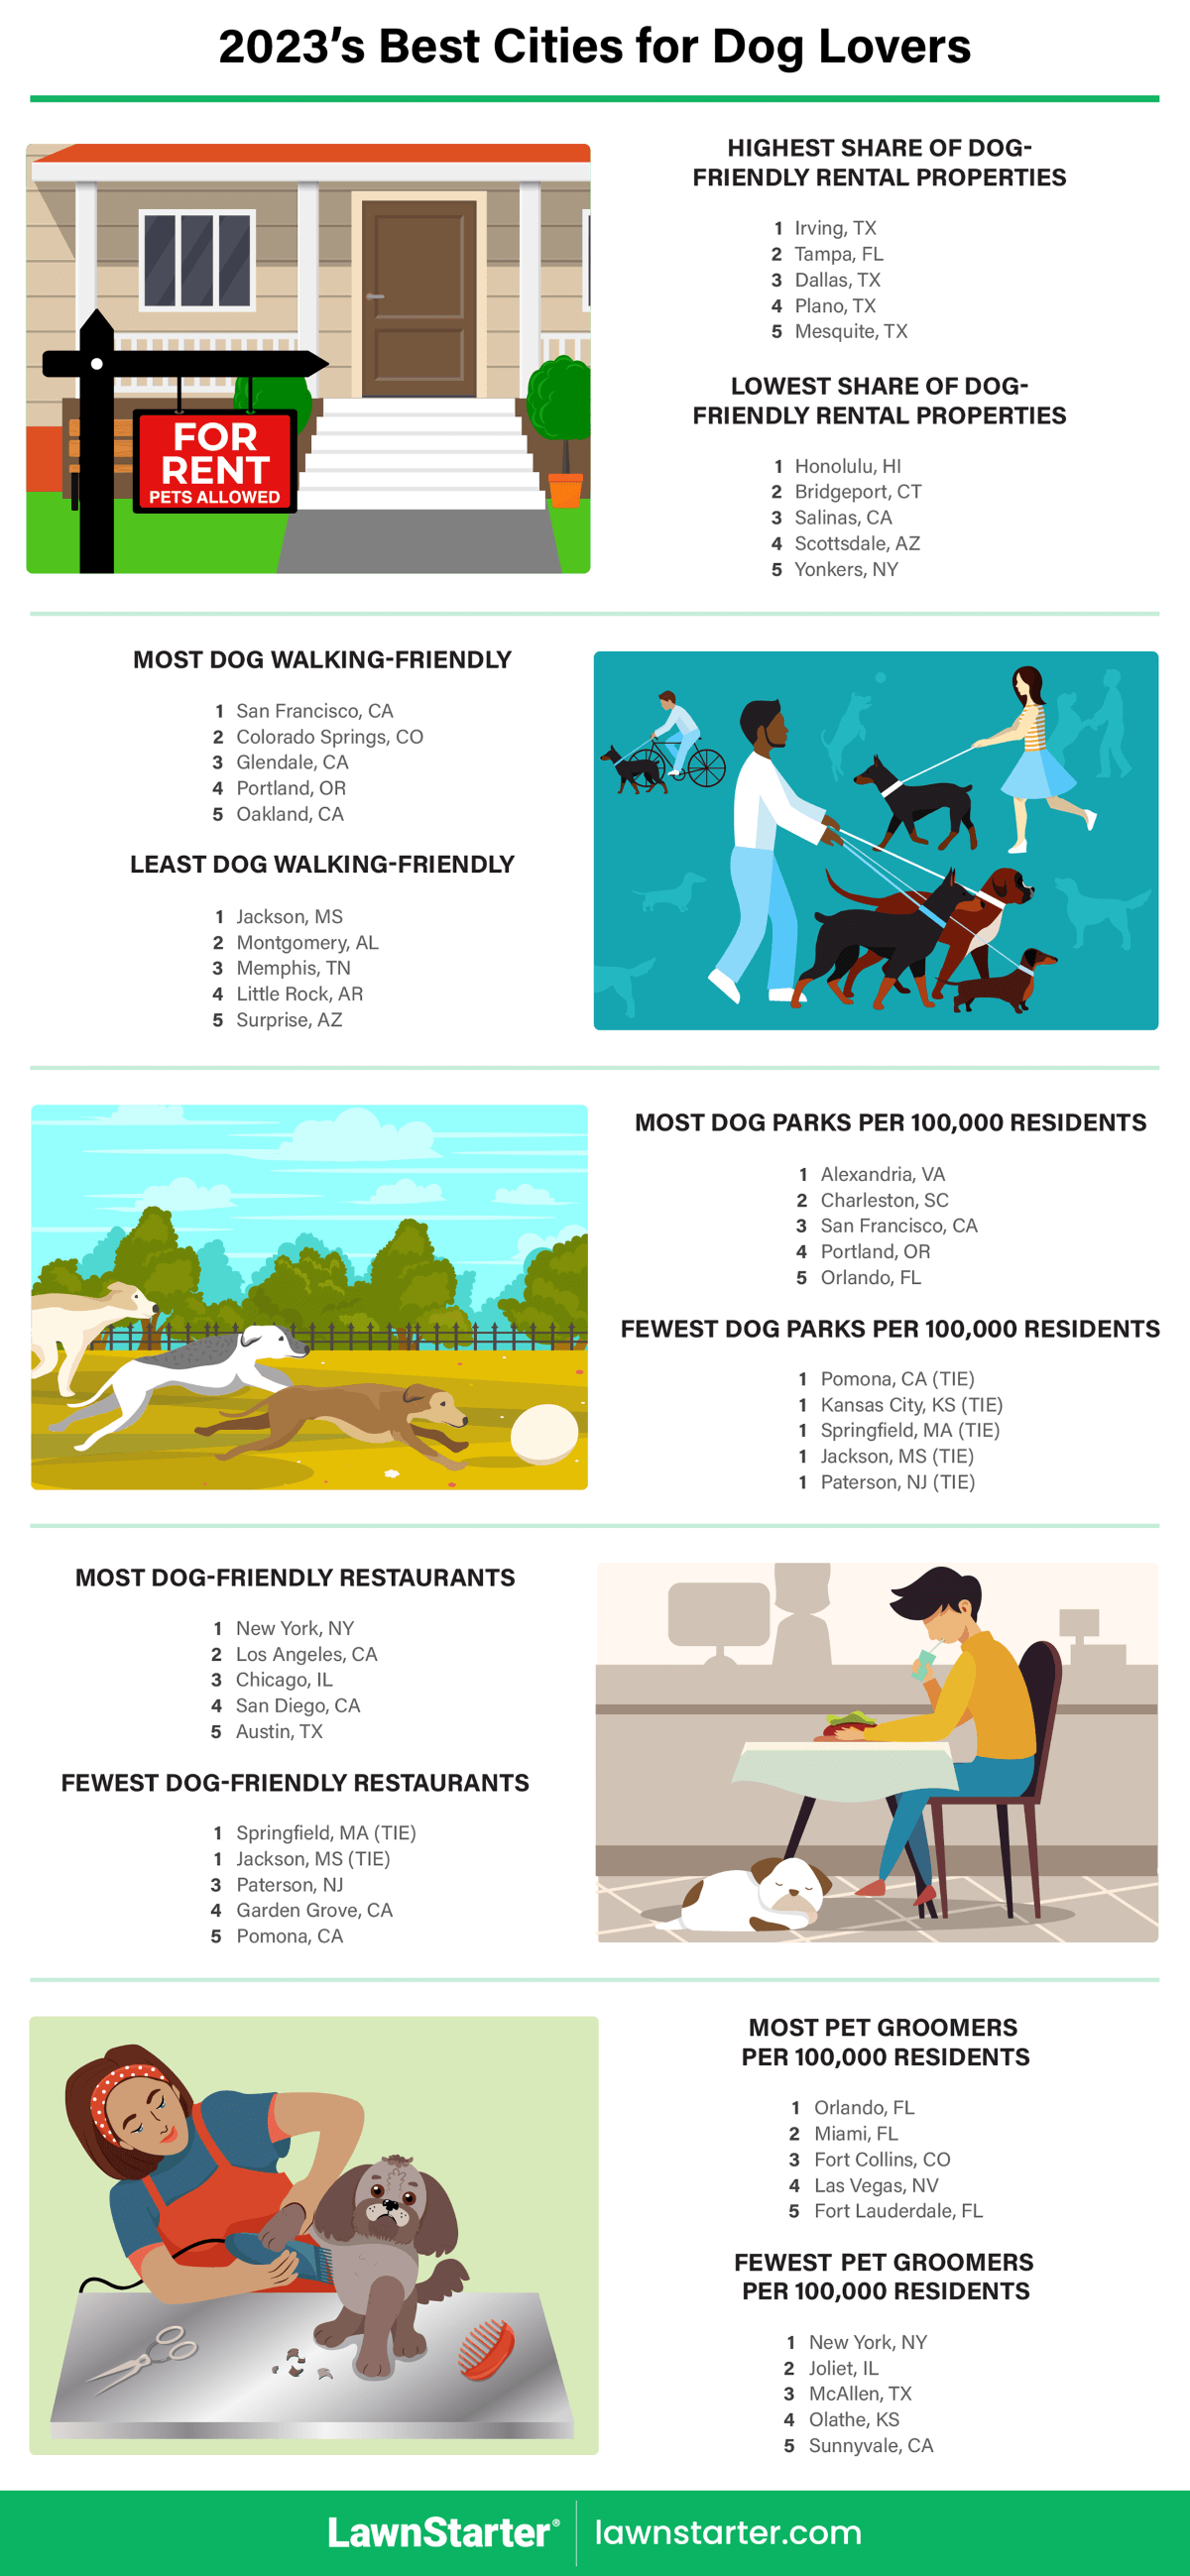 Infographic showing the Best Cities for Dog Lovers, a ranking based on access to dog-friendly housing and businesses, suitability of dog walking, affordability of canine services, and more